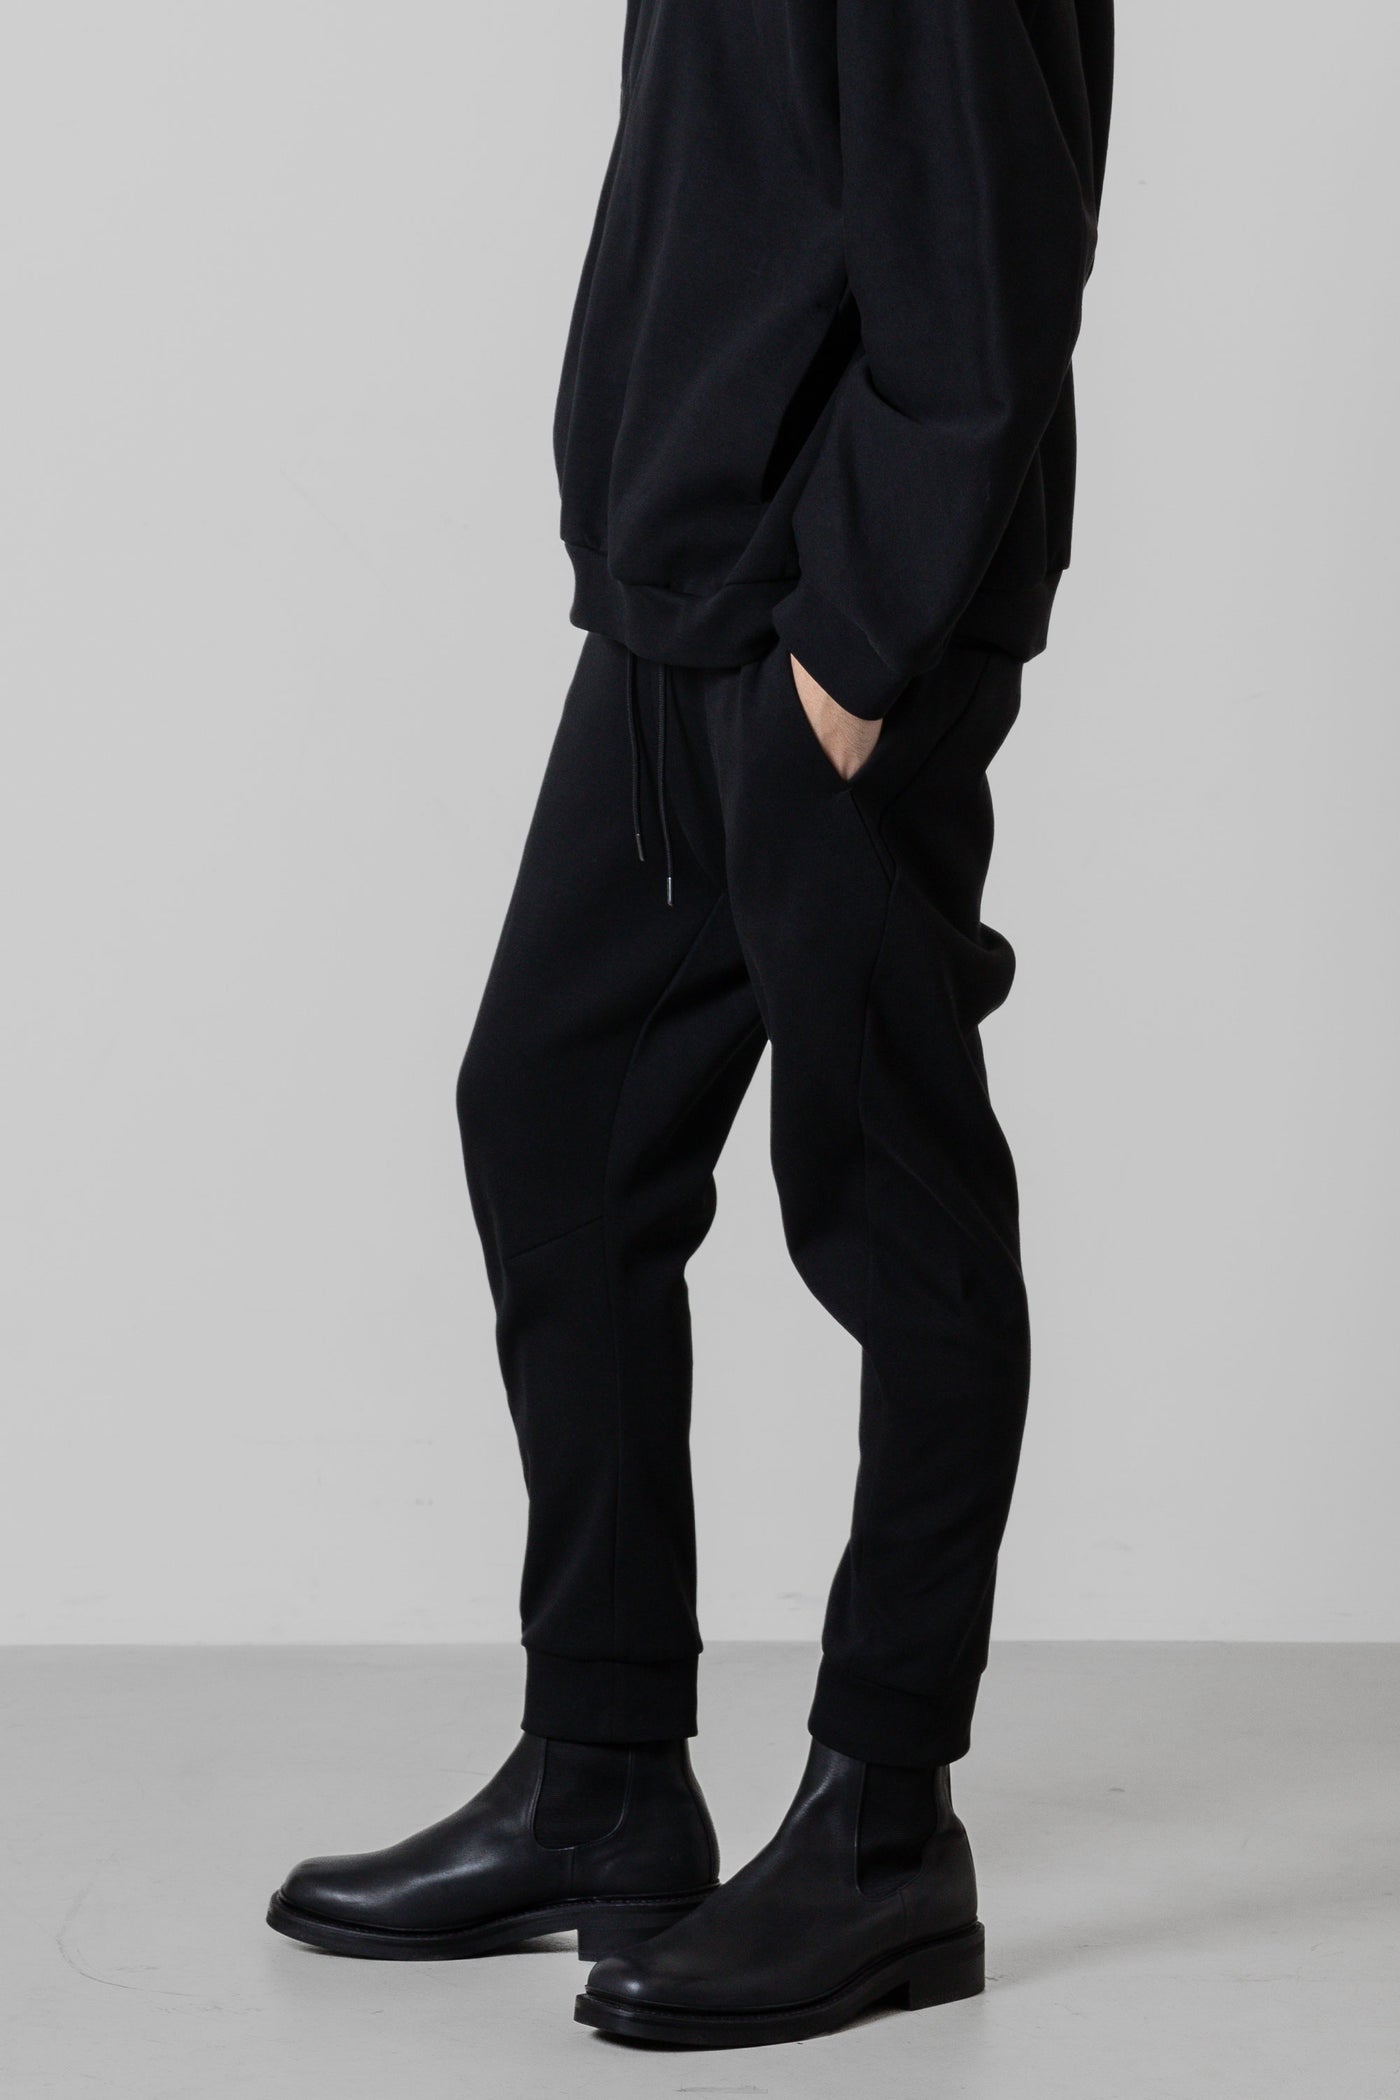 Released in February AP41-025 Cotton/Polyester double knit 3D jogger pants